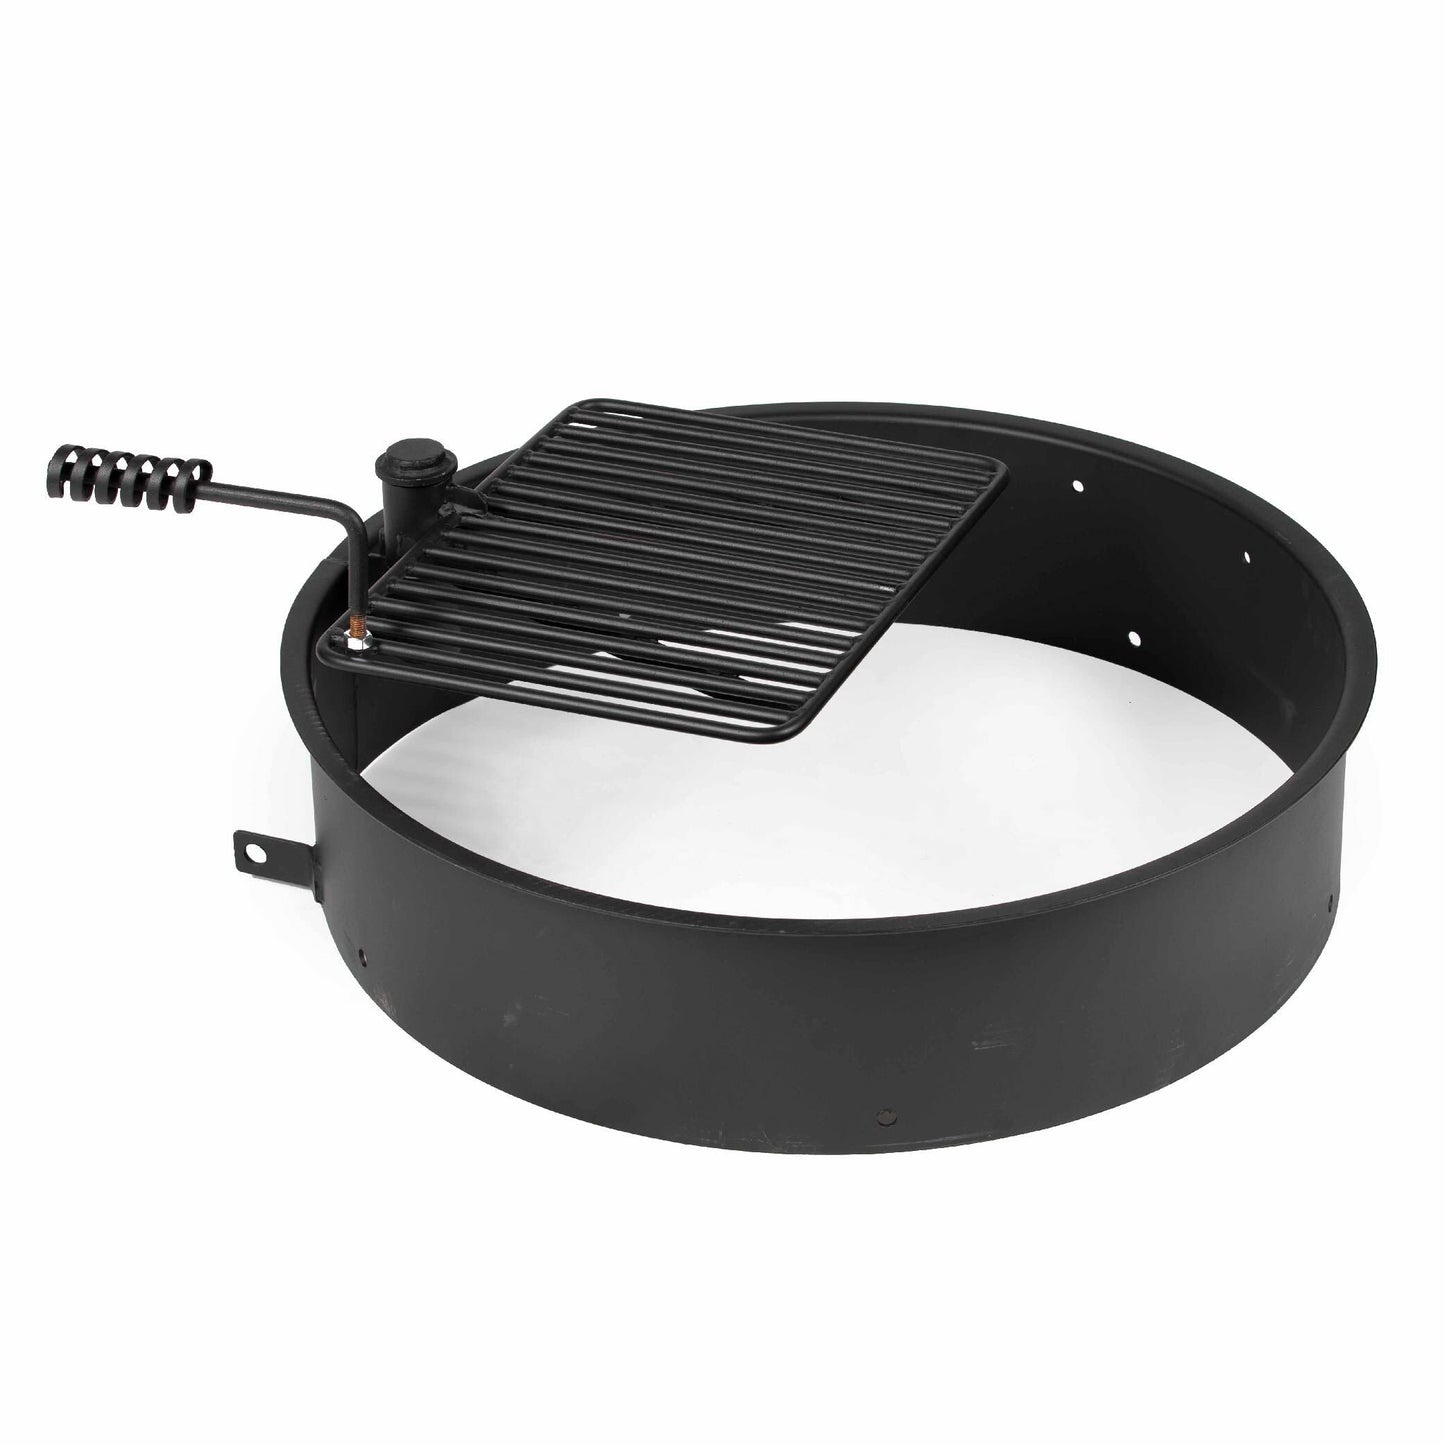 Steel Camp Fire Ring & Outdoor Cooking Grate - Fire Ring Size: 32" | 32" - view 7